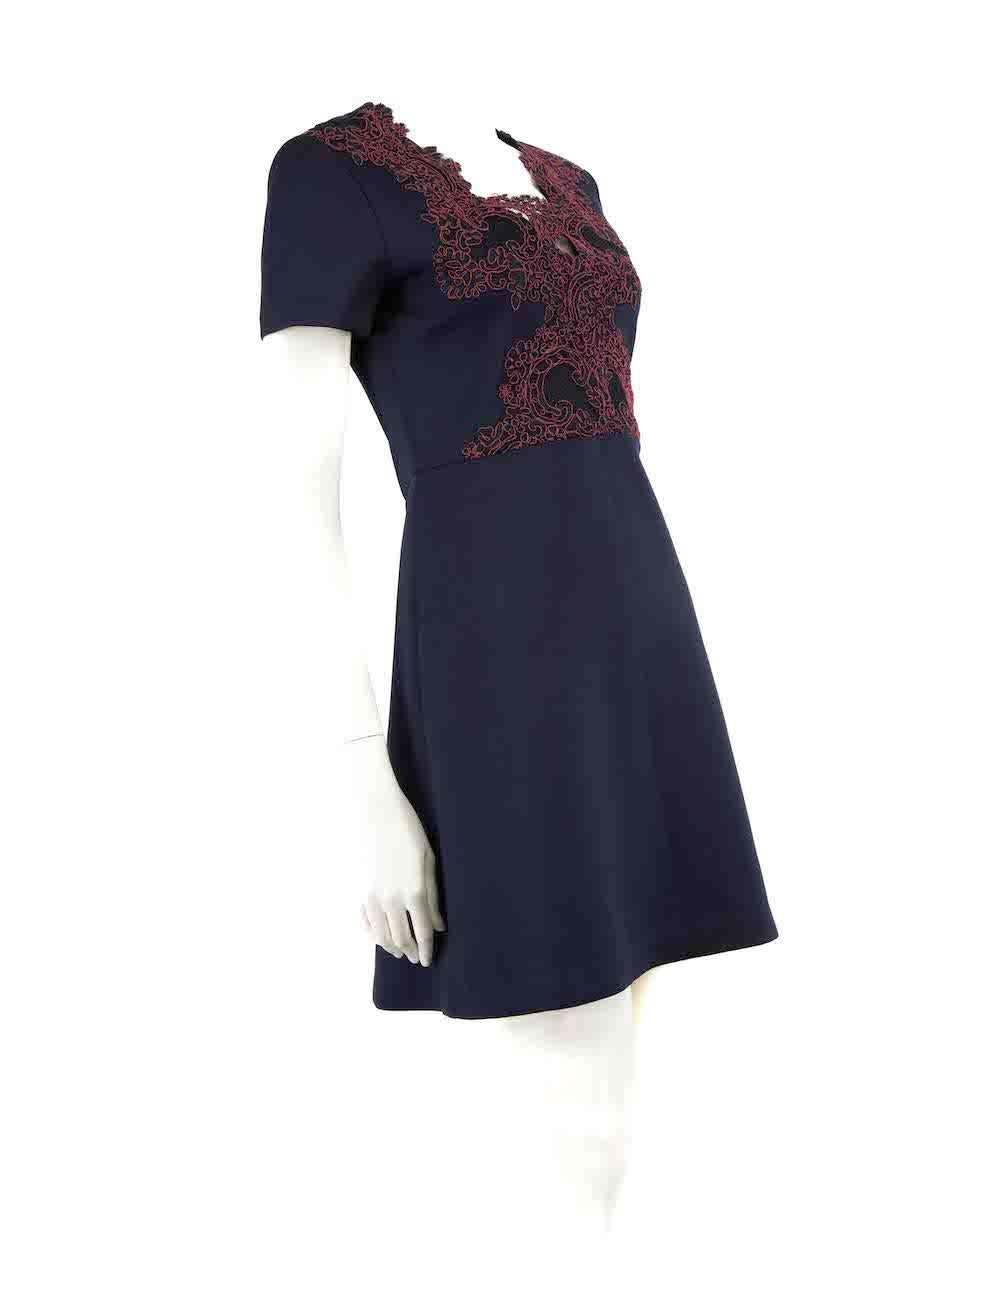 CONDITION is Very good. Hardly any visible wear to dress is evident on this used Sandro designer resale item.
 
 
 
 Details
 
 
 Navy
 
 Polyester
 
 Mini dress
 
 V neckline
 
 Lace detail on neckline
 
 Back zip closure
 
 
 
 
 
 Made in Turkey
